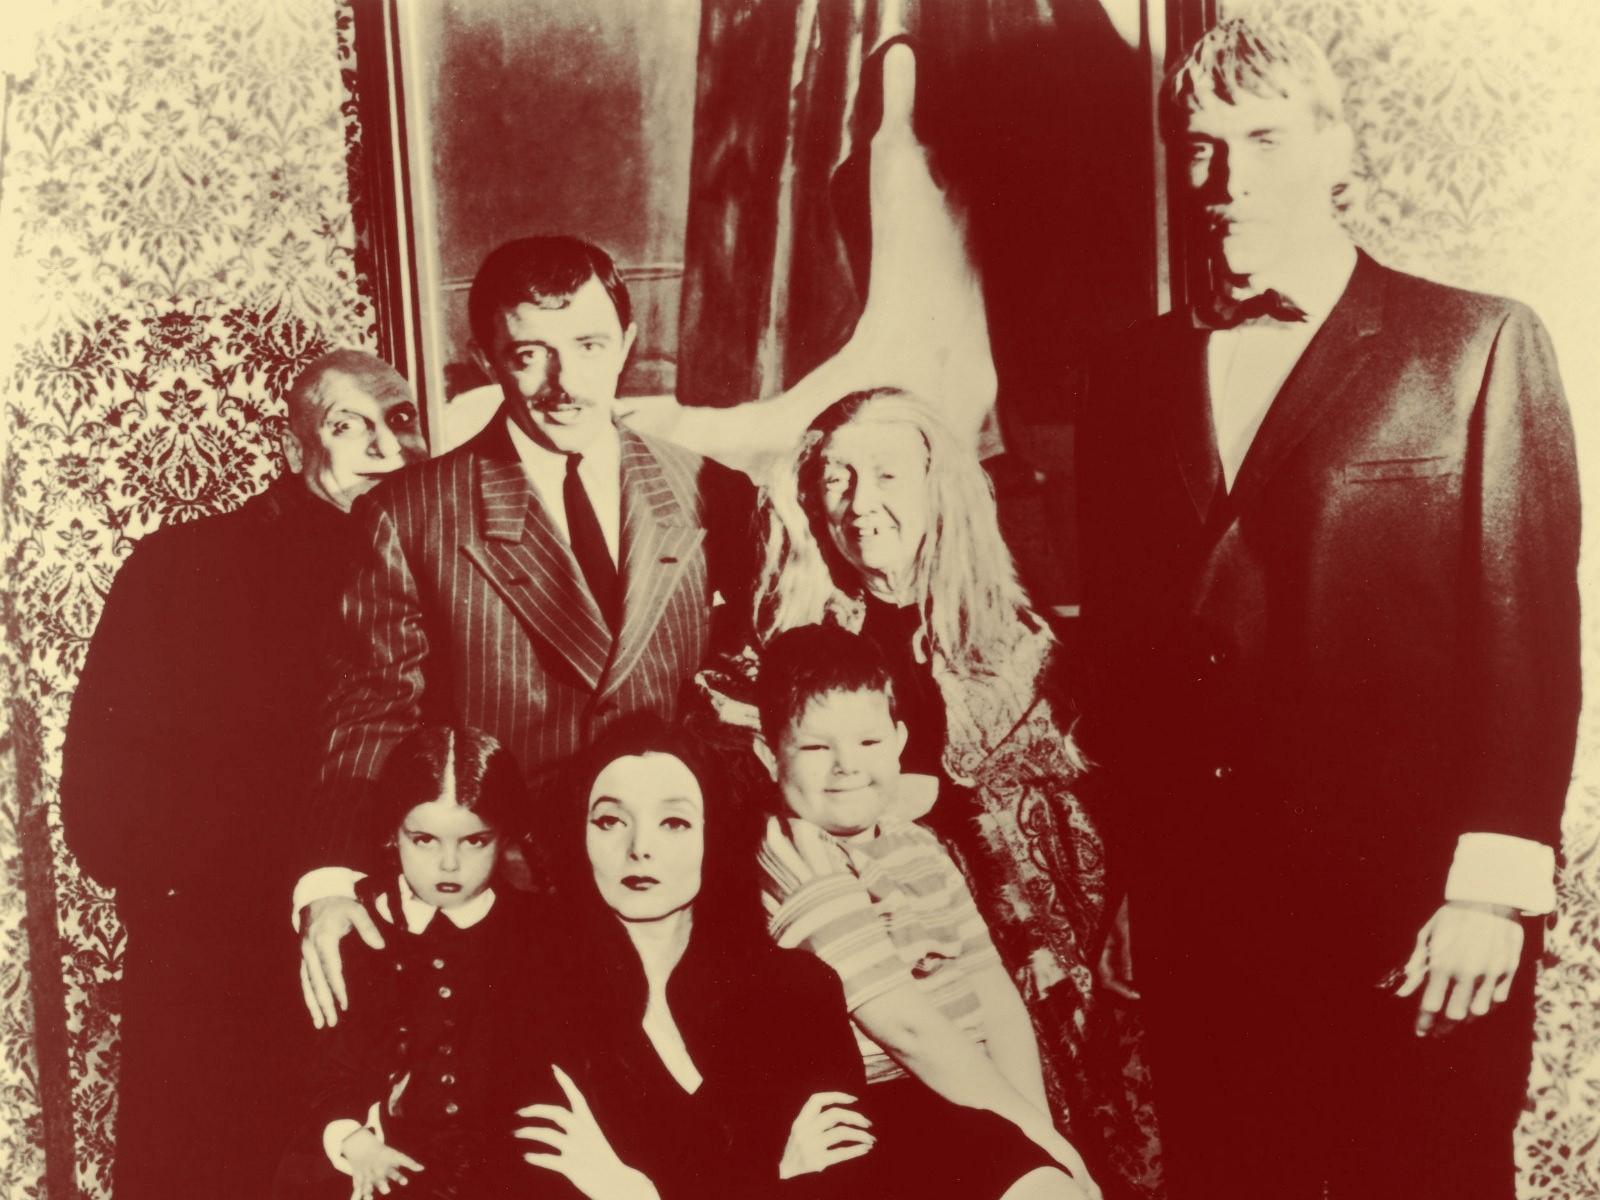 Vintage Addams Family Wallpaper Mac Picture Tablet